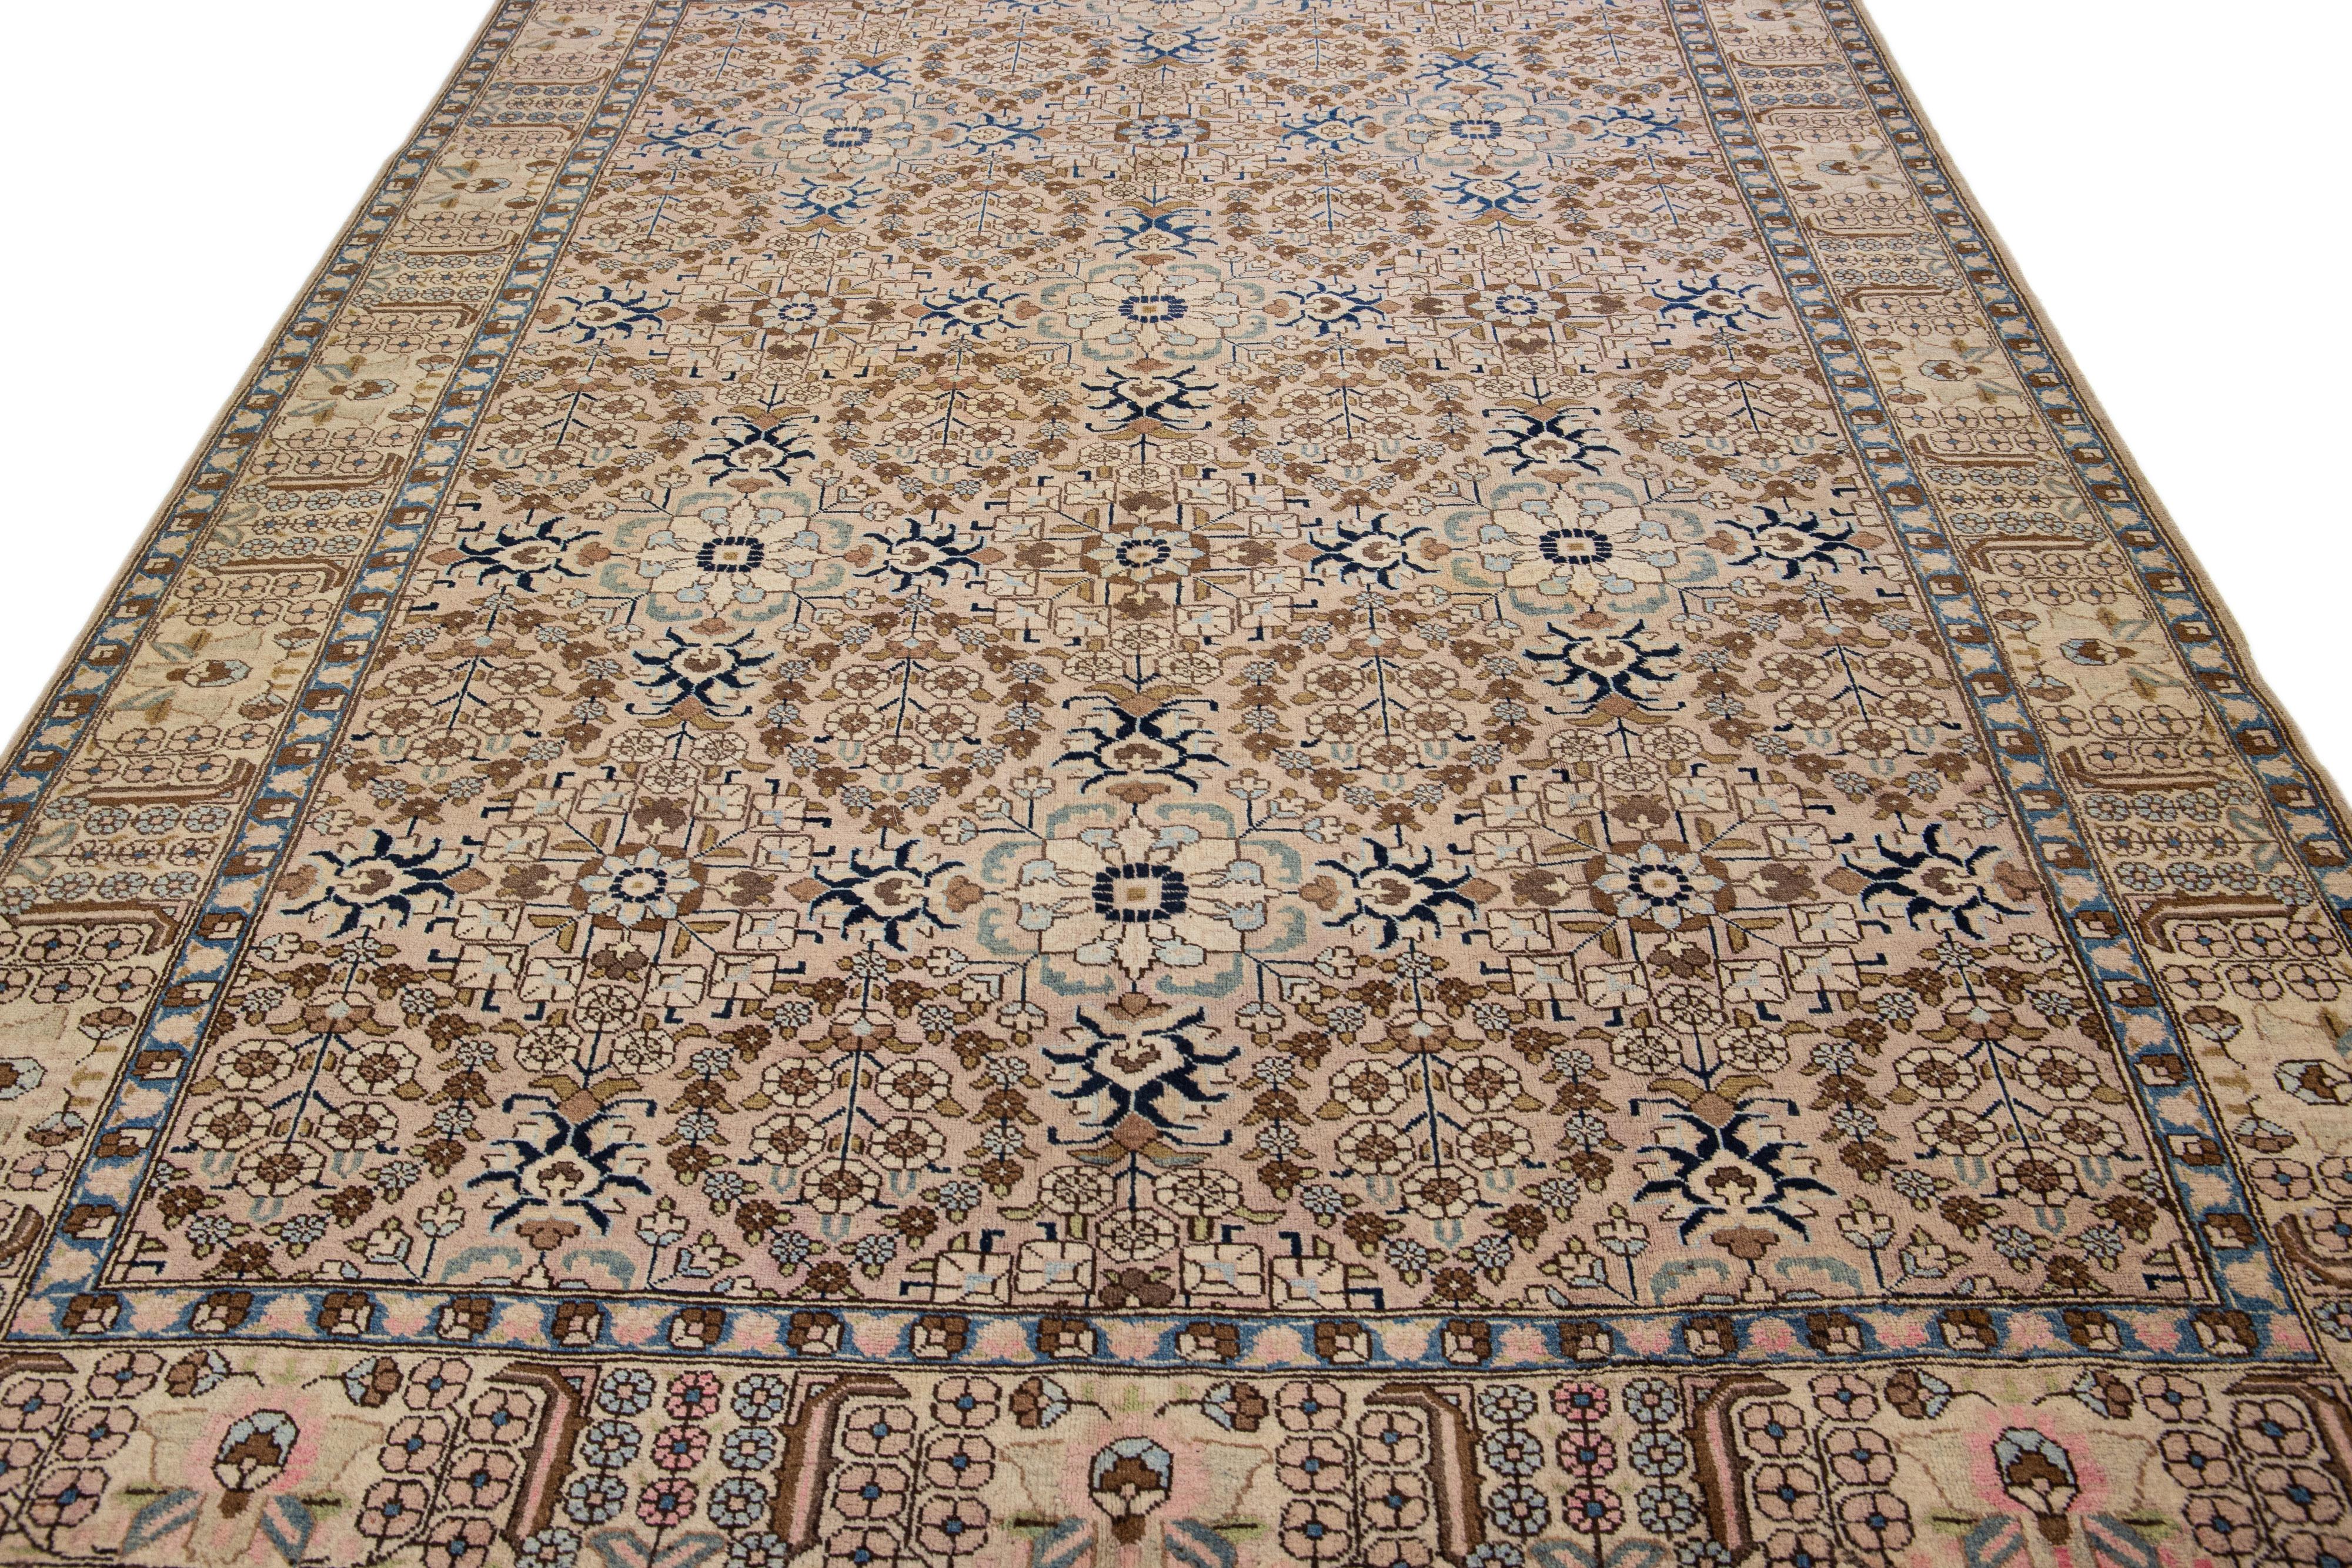 Beautiful antique Tabriz hand-knotted wool rug with a peach field. This Persian piece has blue, brown, and beige accents in a gorgeous all-over floral design.

This rug measures 7' x 10'5